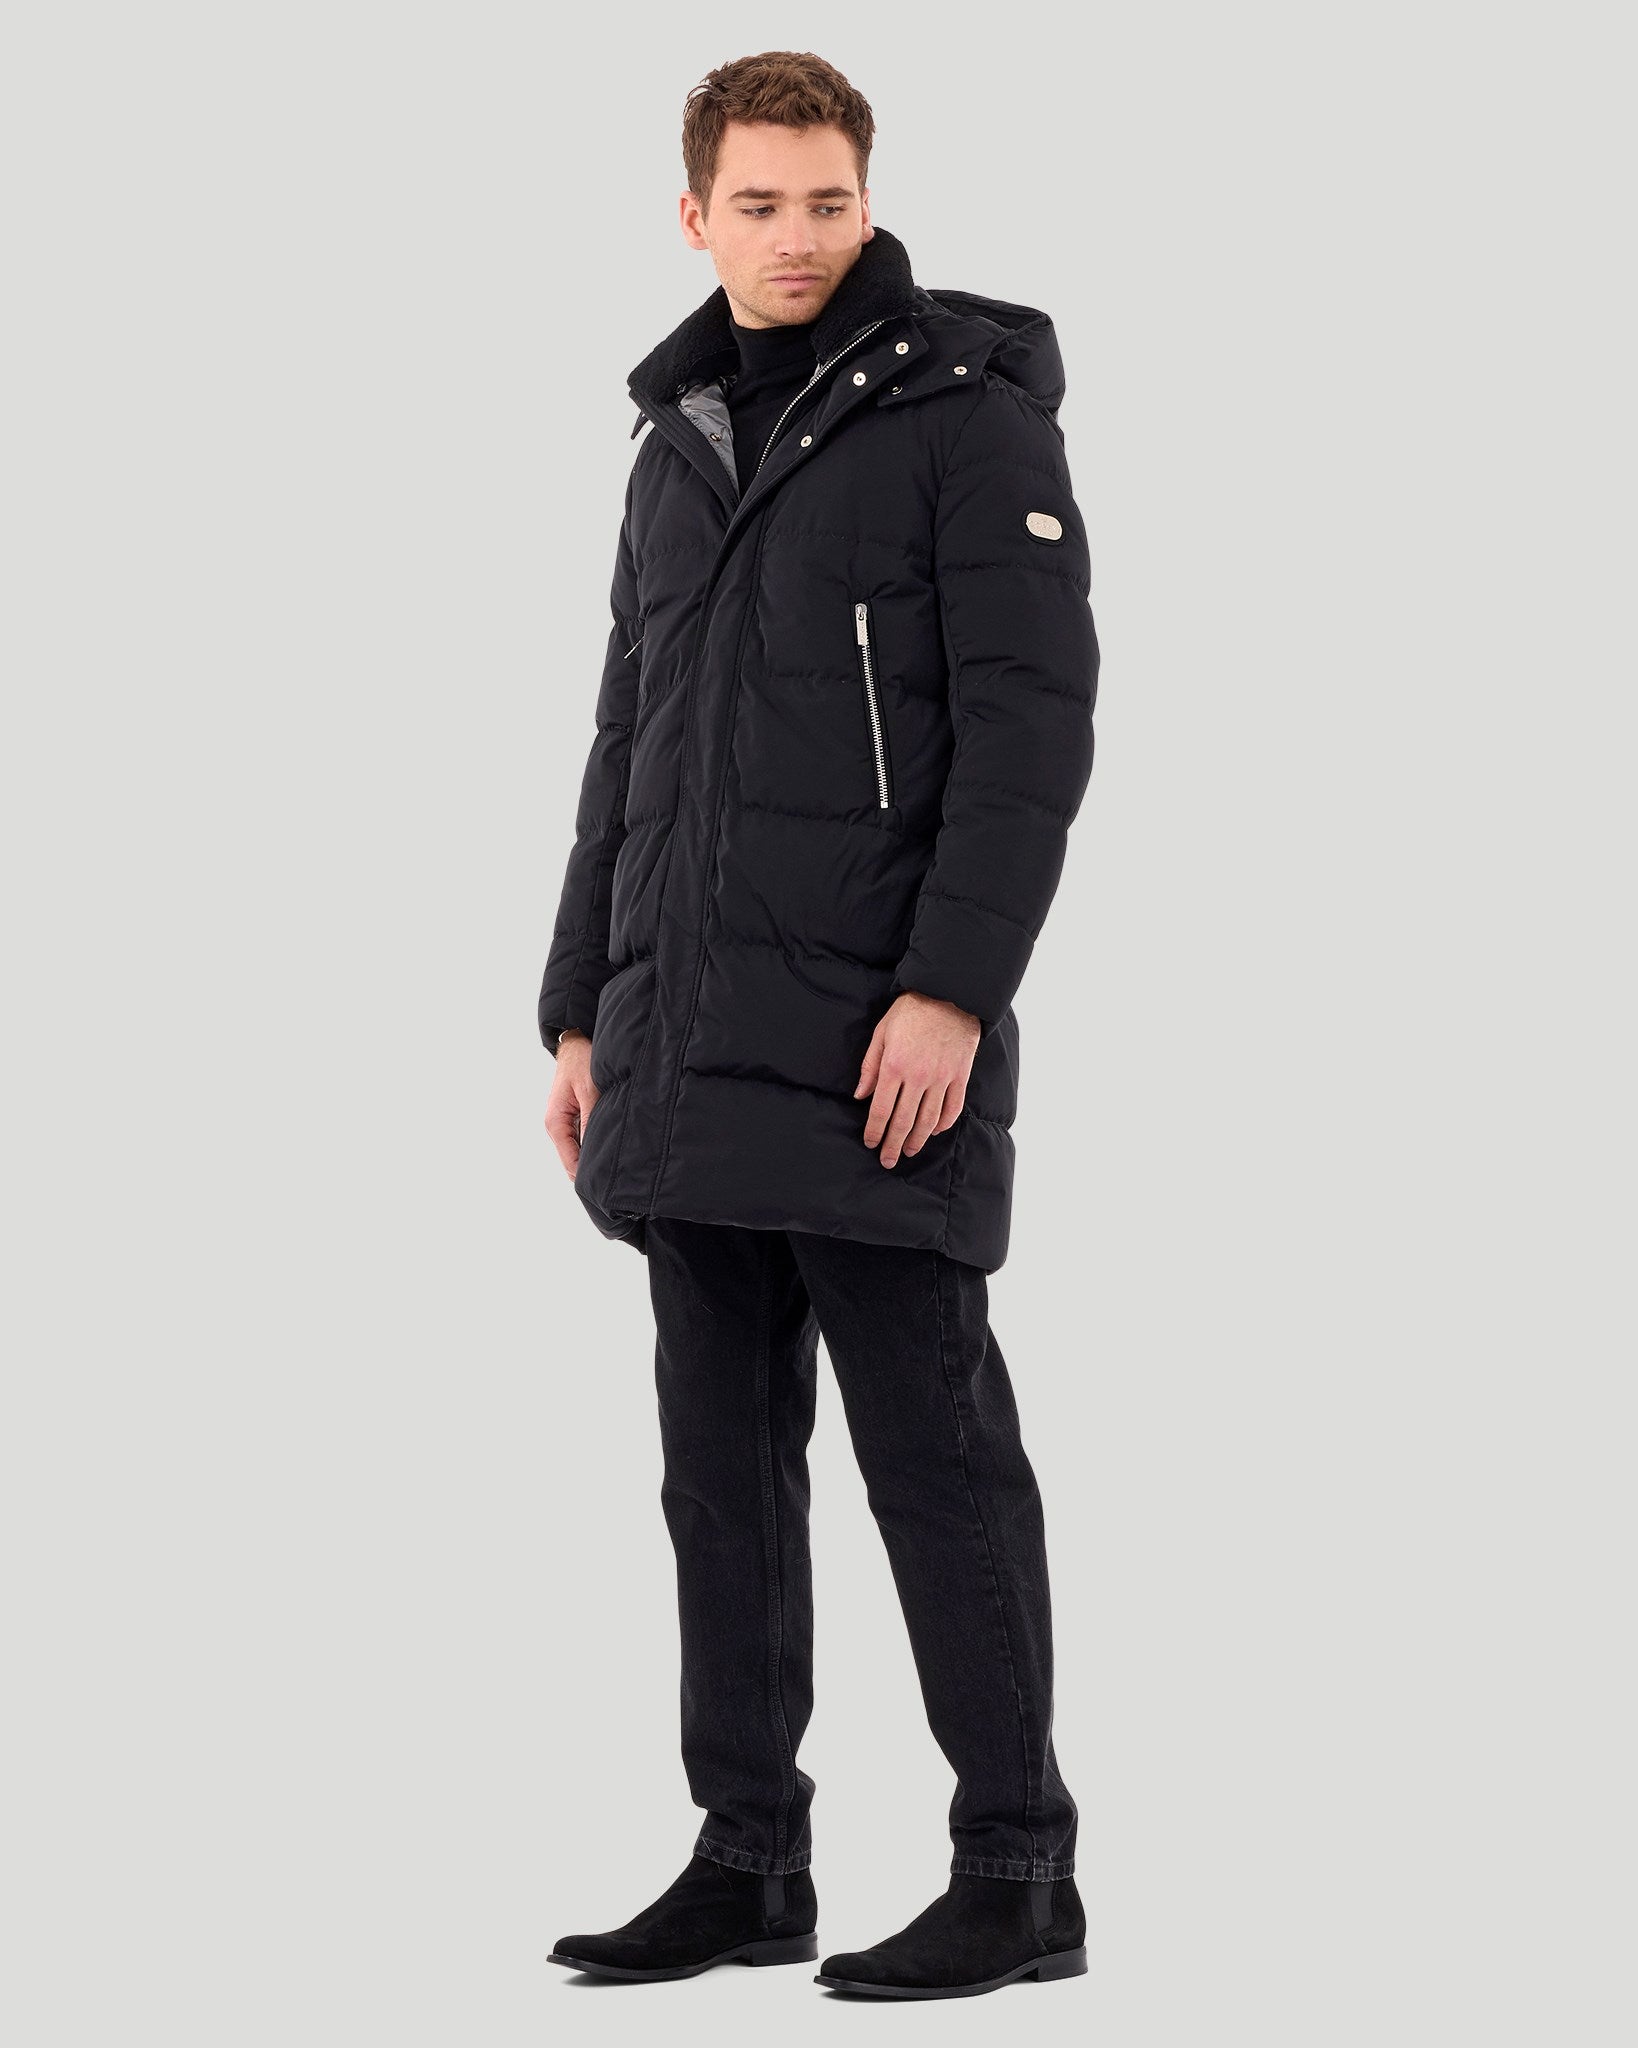 Men Outerwear Jackets & Coats Shearling Collection - Gorski